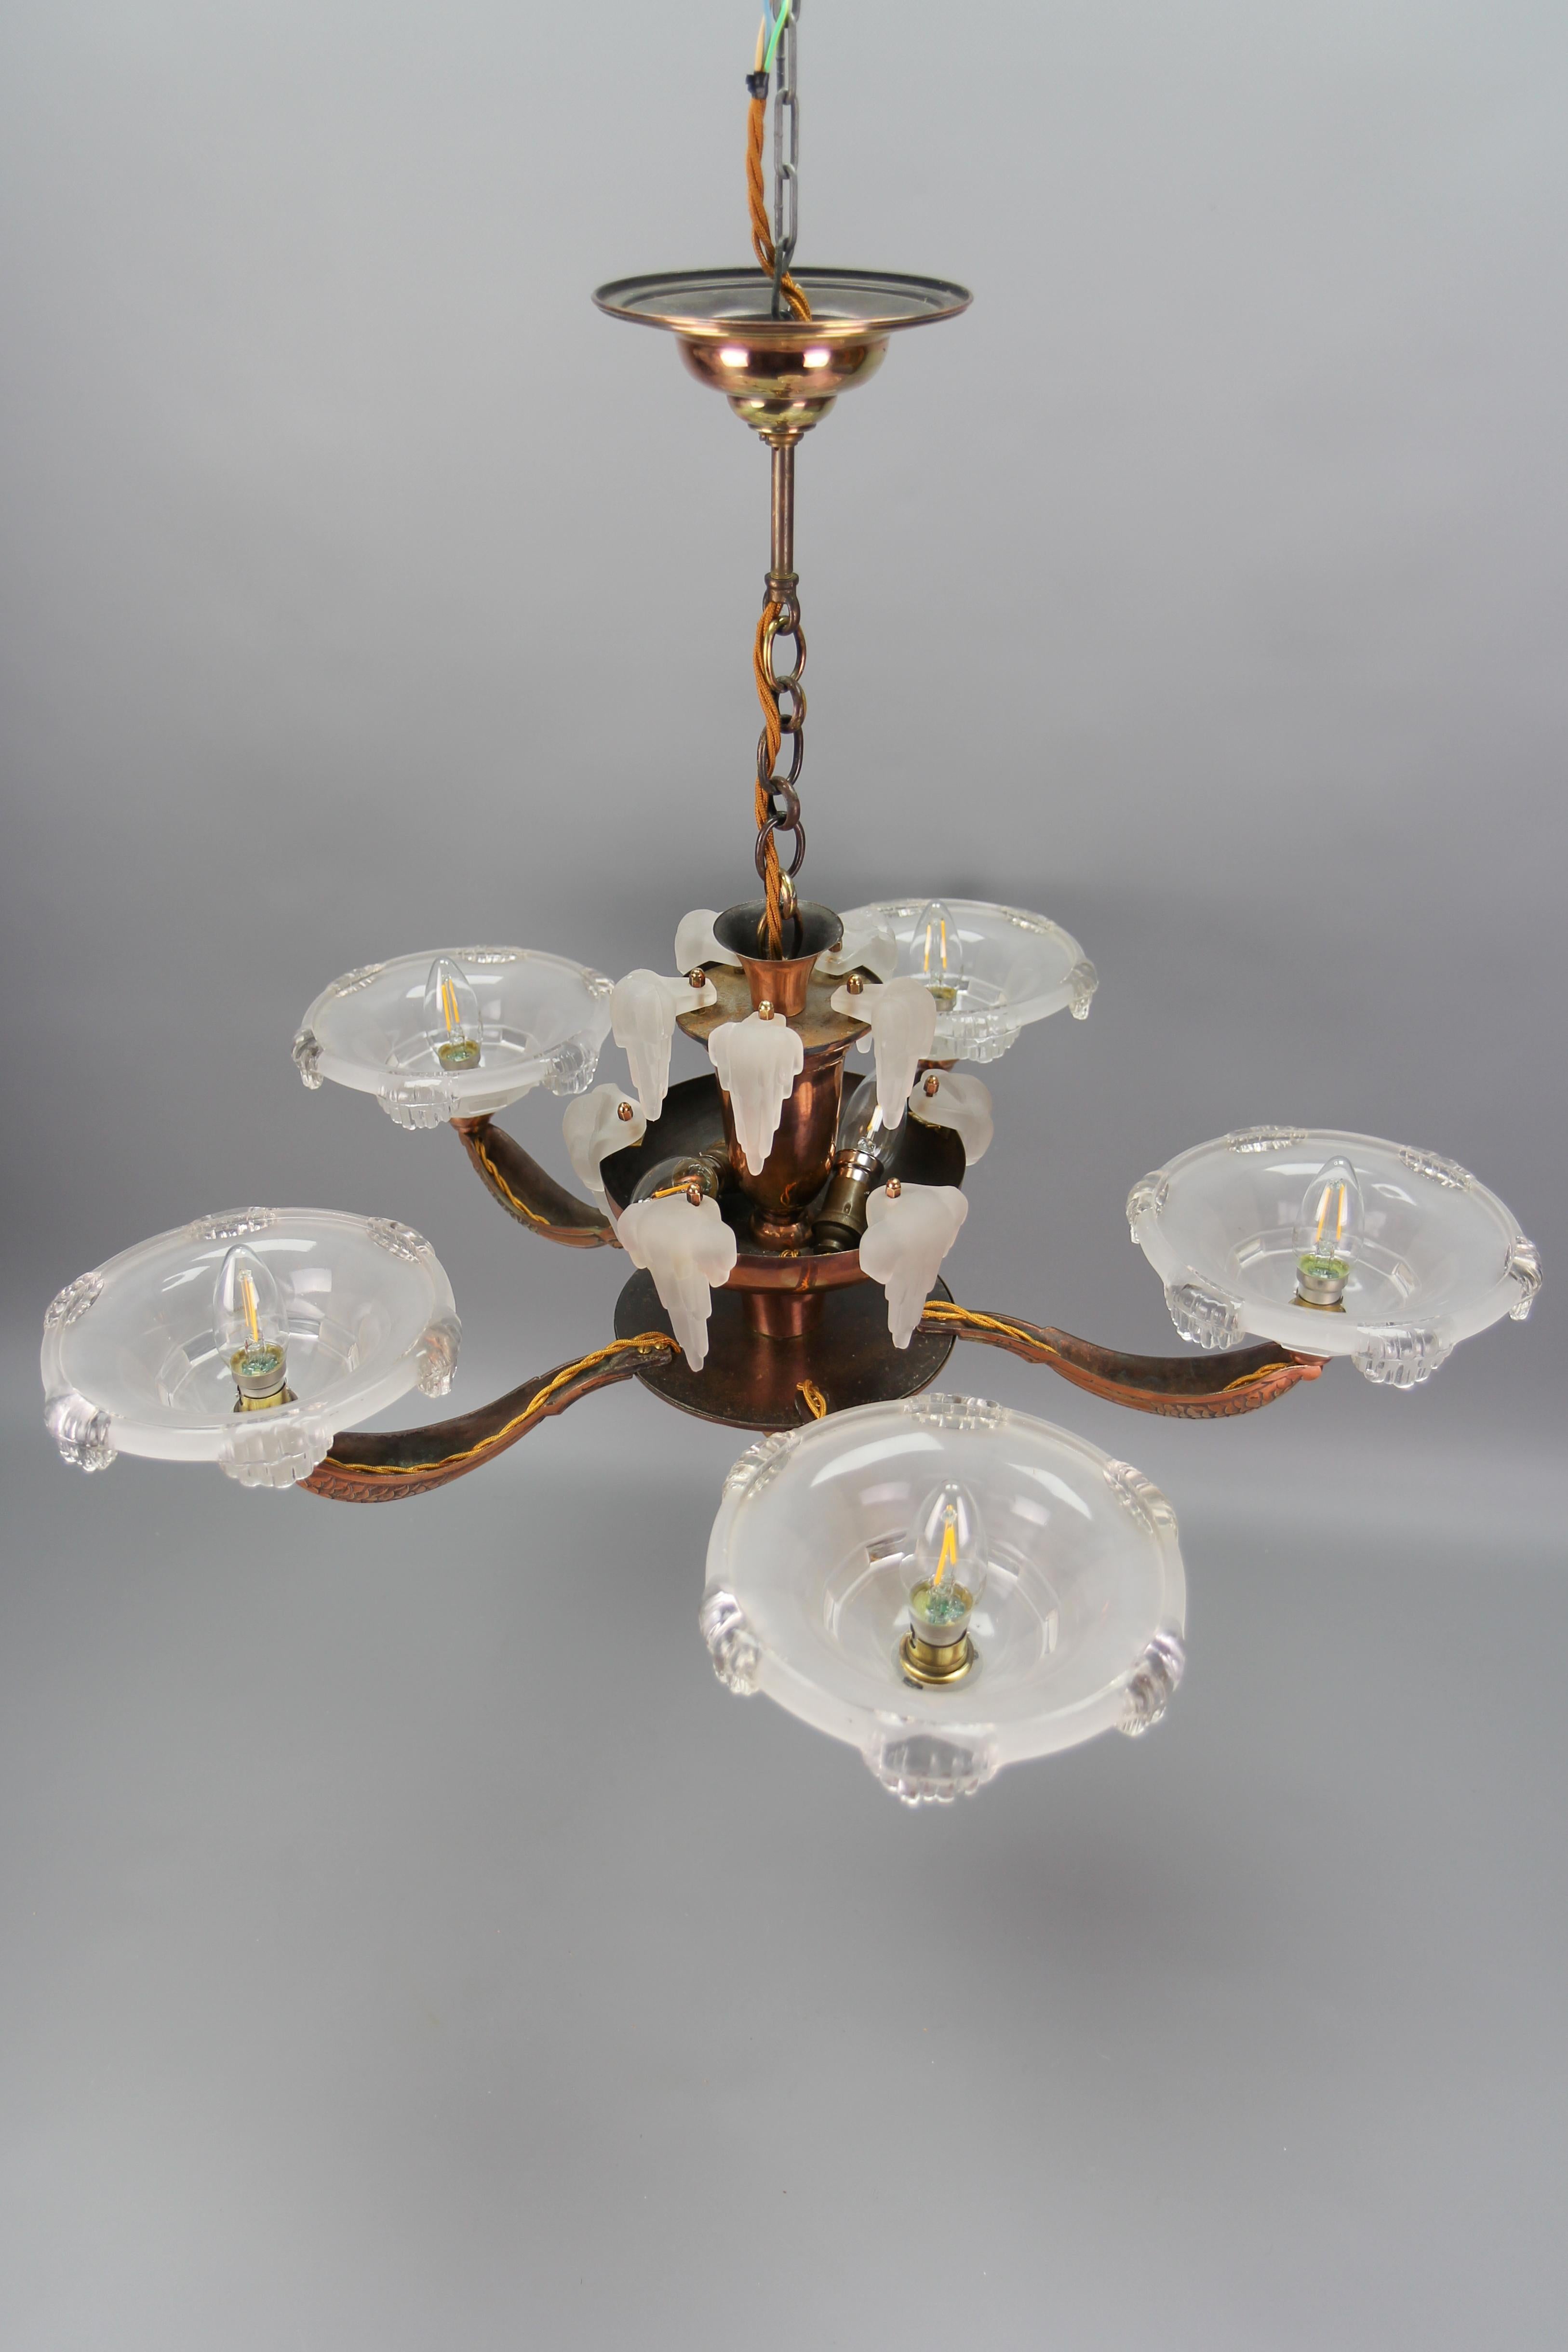 French Art Deco 7-Light Frosted Glass, Brass and Copper Chandelier, 1930s For Sale 8